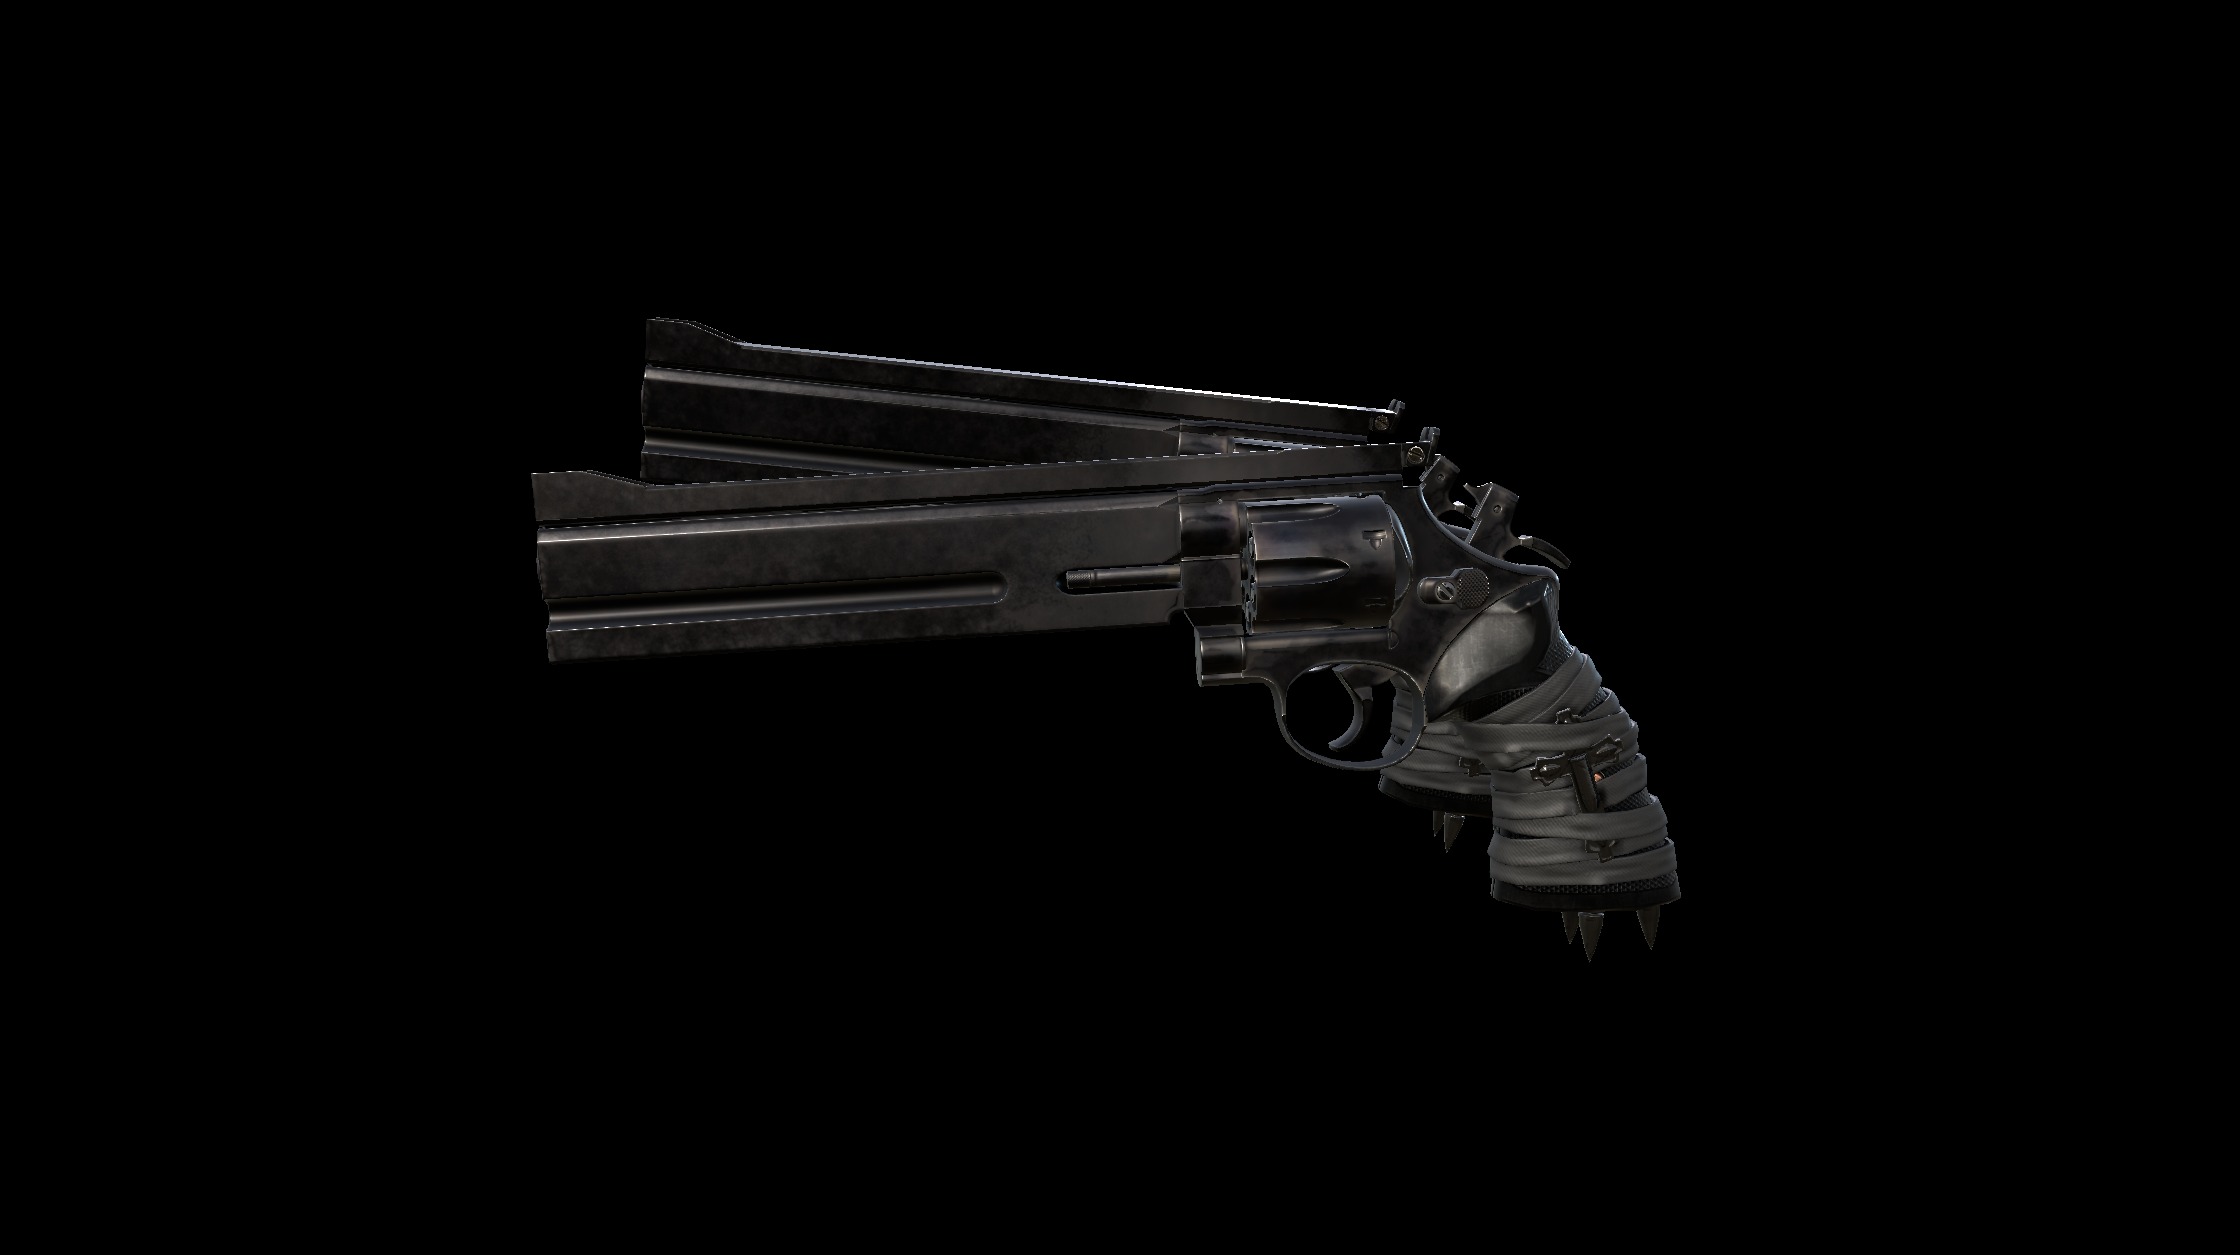 As a former sicario, Sangres is careful when it comes to weapons of choice. The job must get done, there’s no other option. Two trusty revolvers are always by his side - the Castigo .44 Revolvers - that Sangres keeps in perfect condition.

http://www.overkillsoftware.com/games/sangres/ - Akimbo Castigo .44 Revolvers - 3D model by Overkill Software (@overkillsoftware) 3d model